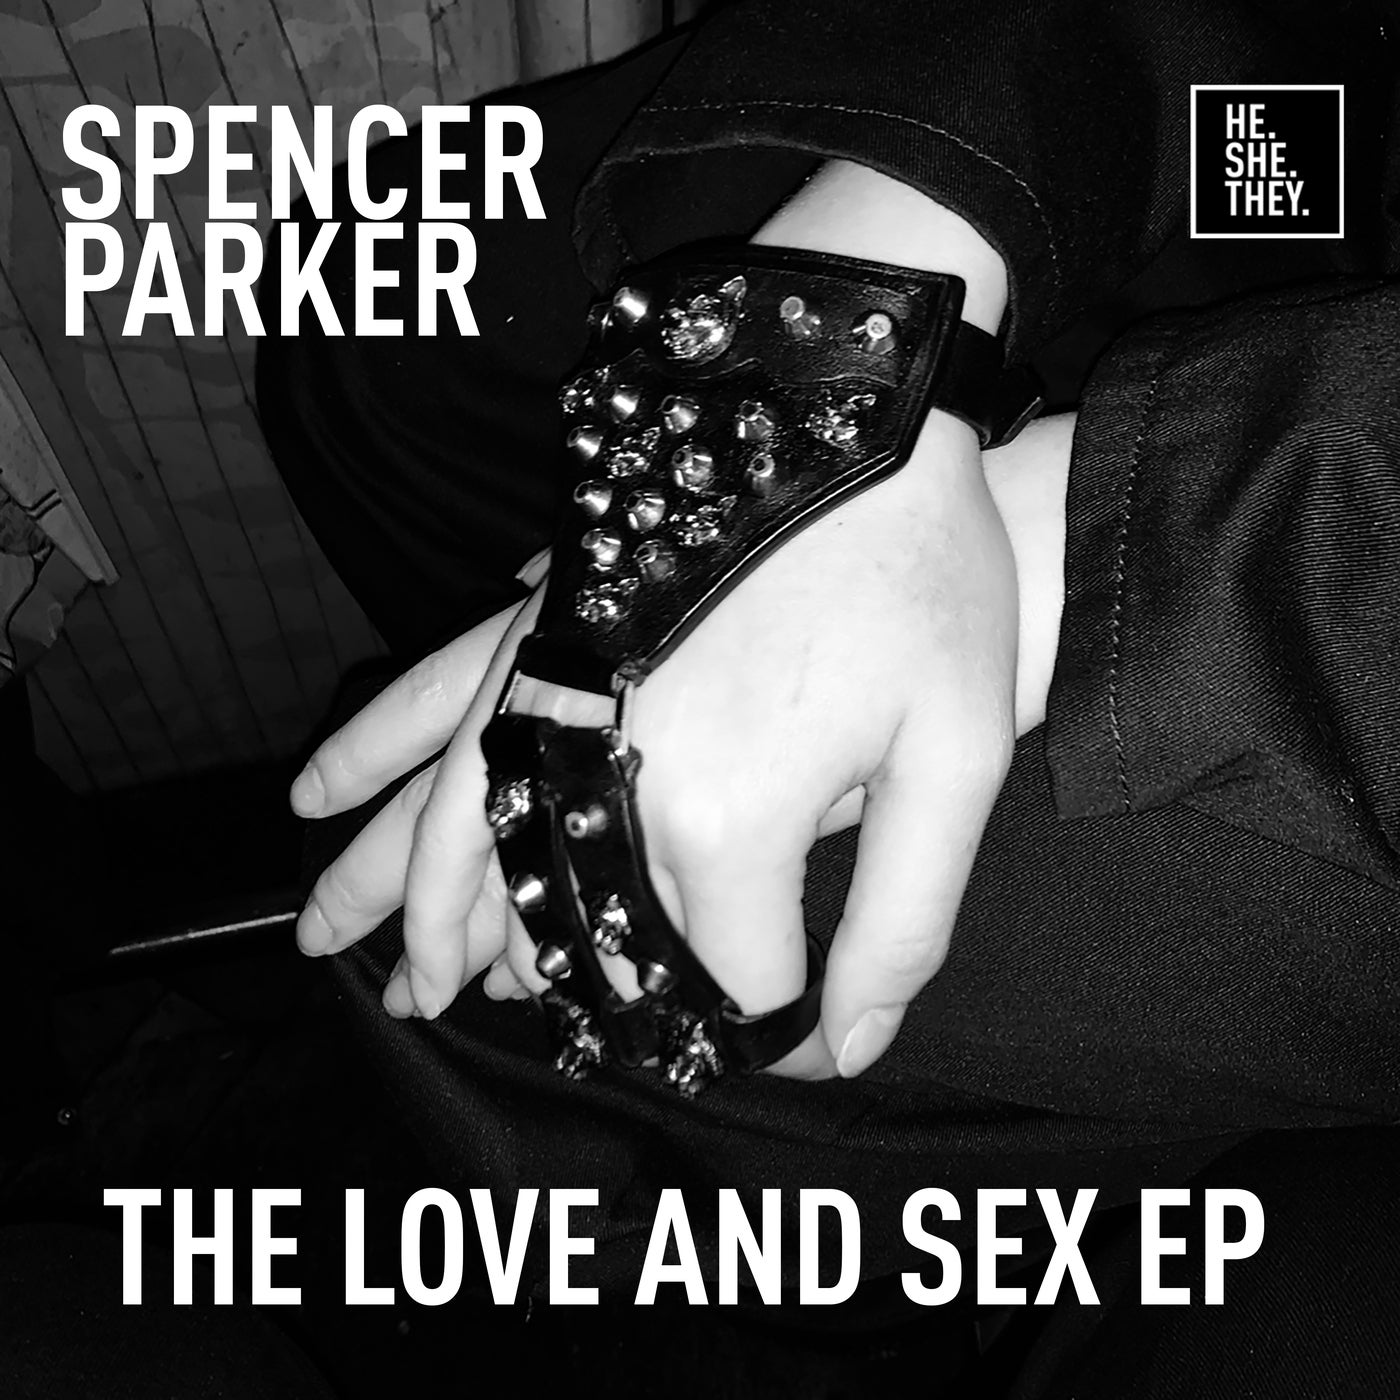 The Love And Sex EP